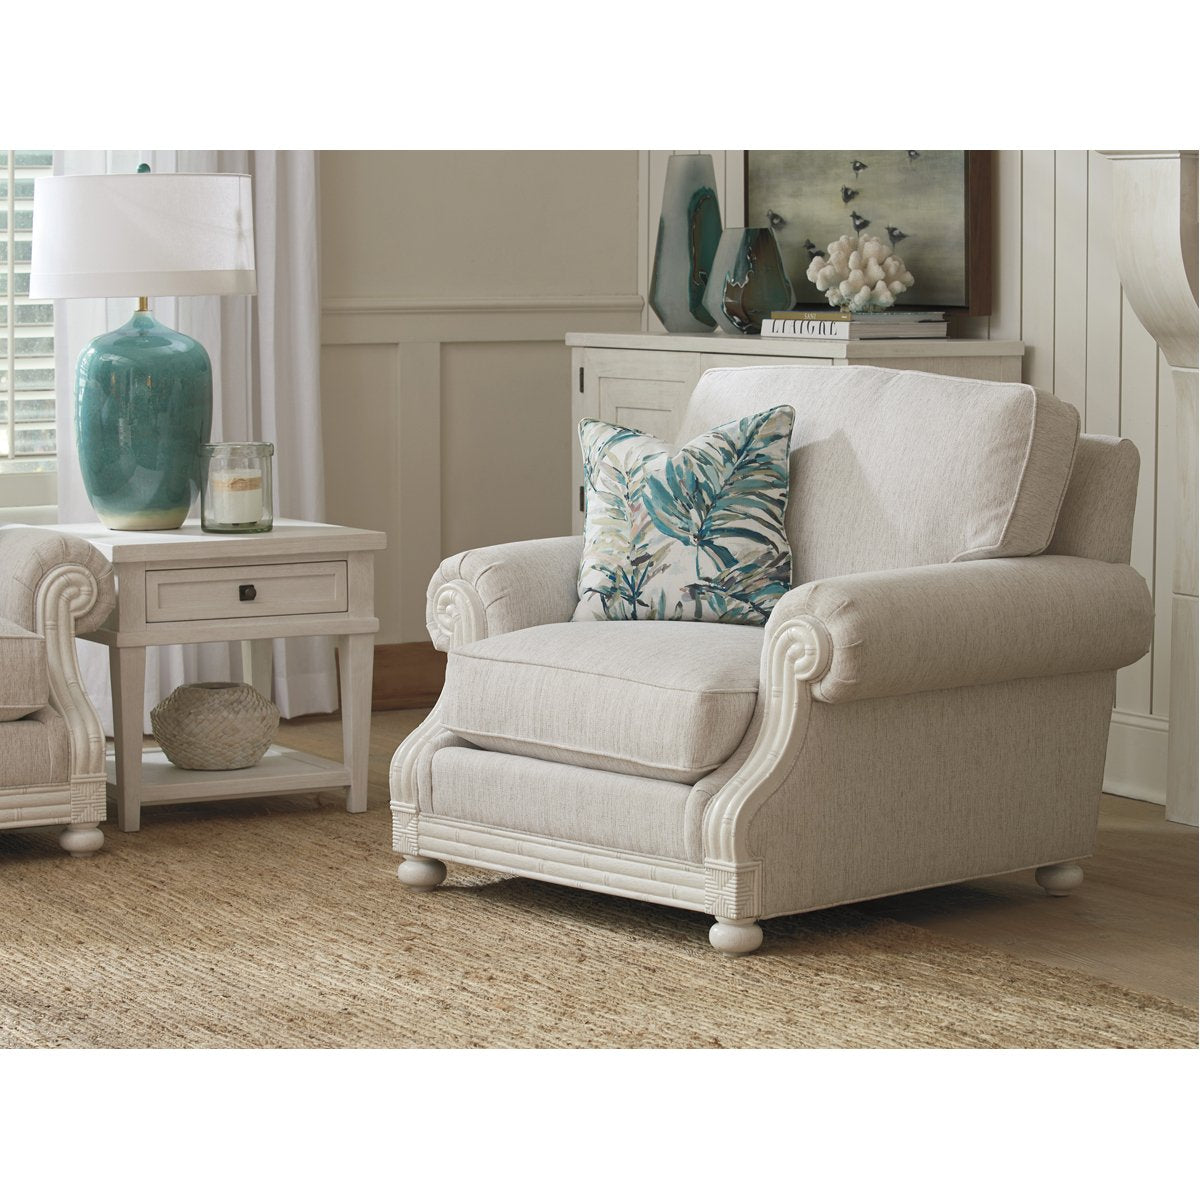 Tommy Bahama Ocean Breeze Coral Gables Chair